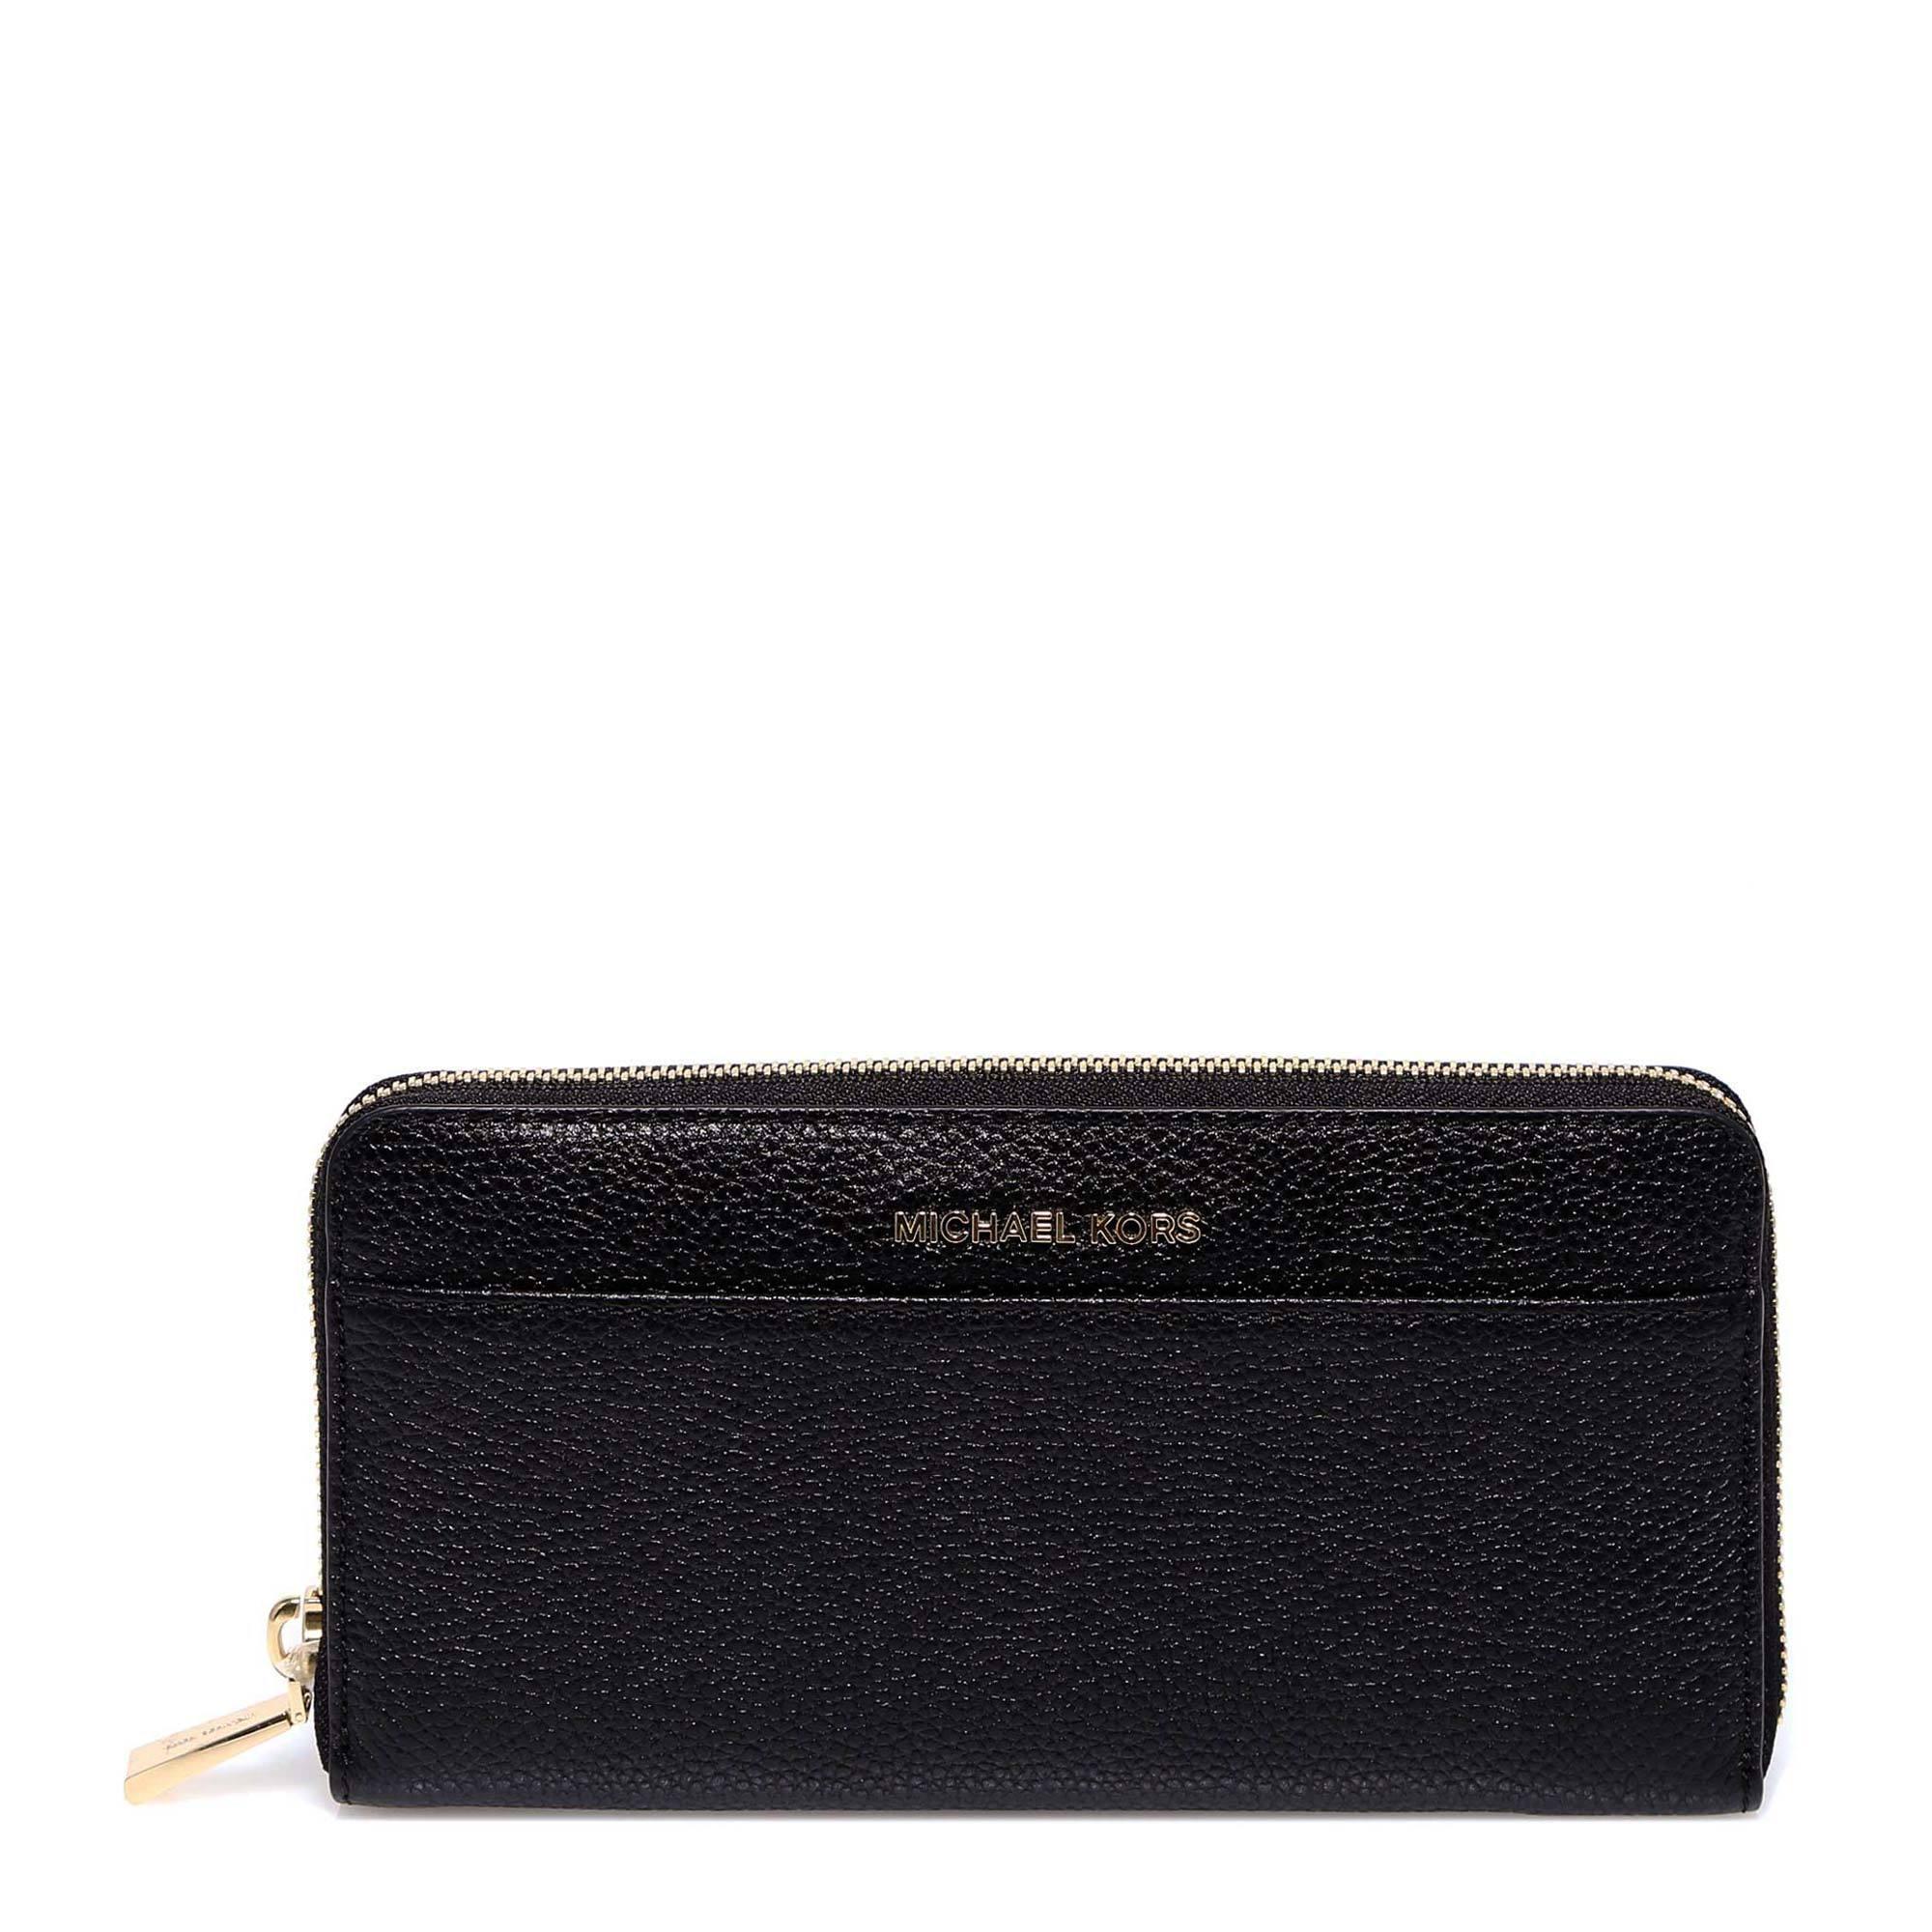 Michael Kors Leather Michael Logo Plaque Continental Wallet in Black - Lyst